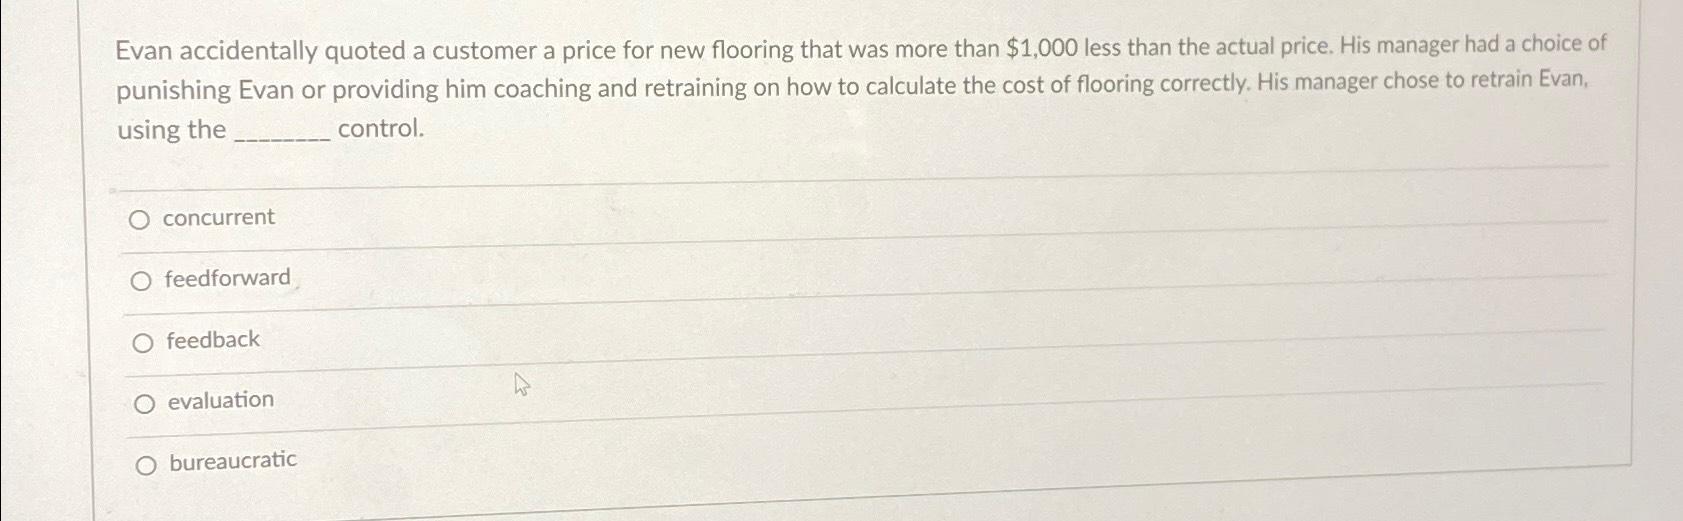 Evan accidentally quoted a customer a price for new flooring that was more than $1,000 less than the actual